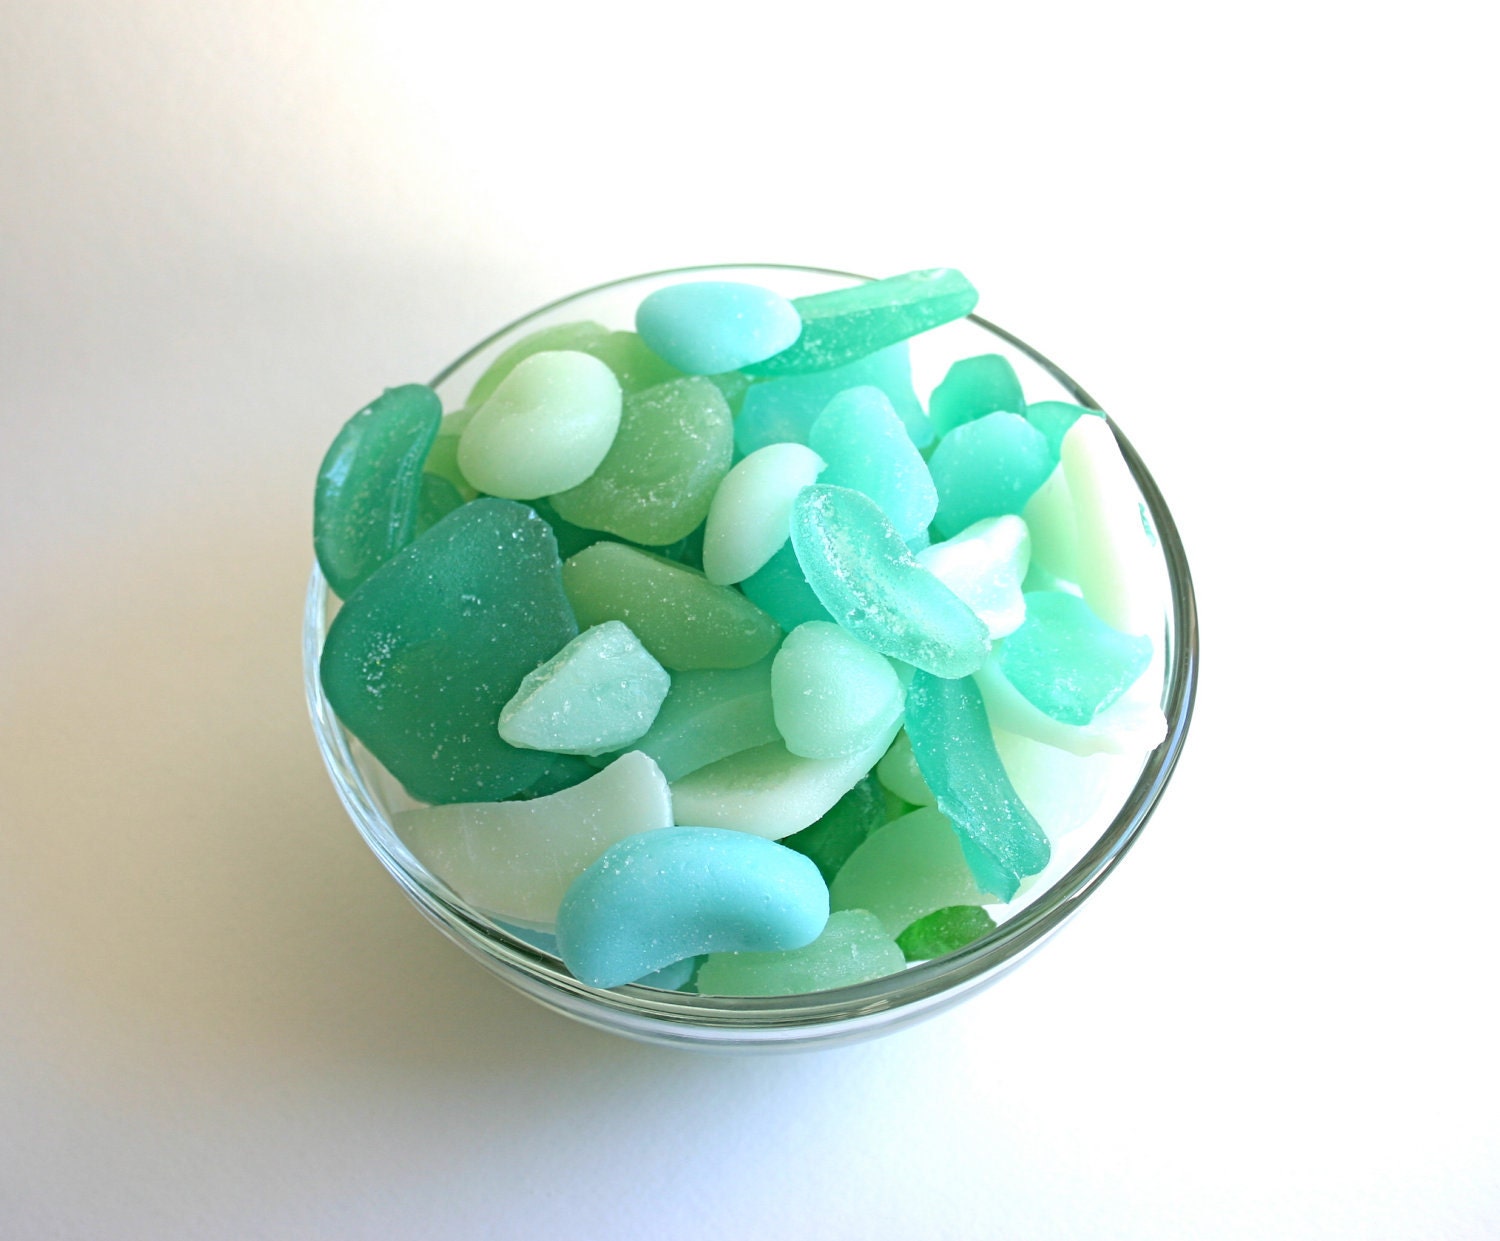 Hard Candy Sea Glass 3 oz. sample bag for gift giving, favors or cake decorating - andiespecialtysweets